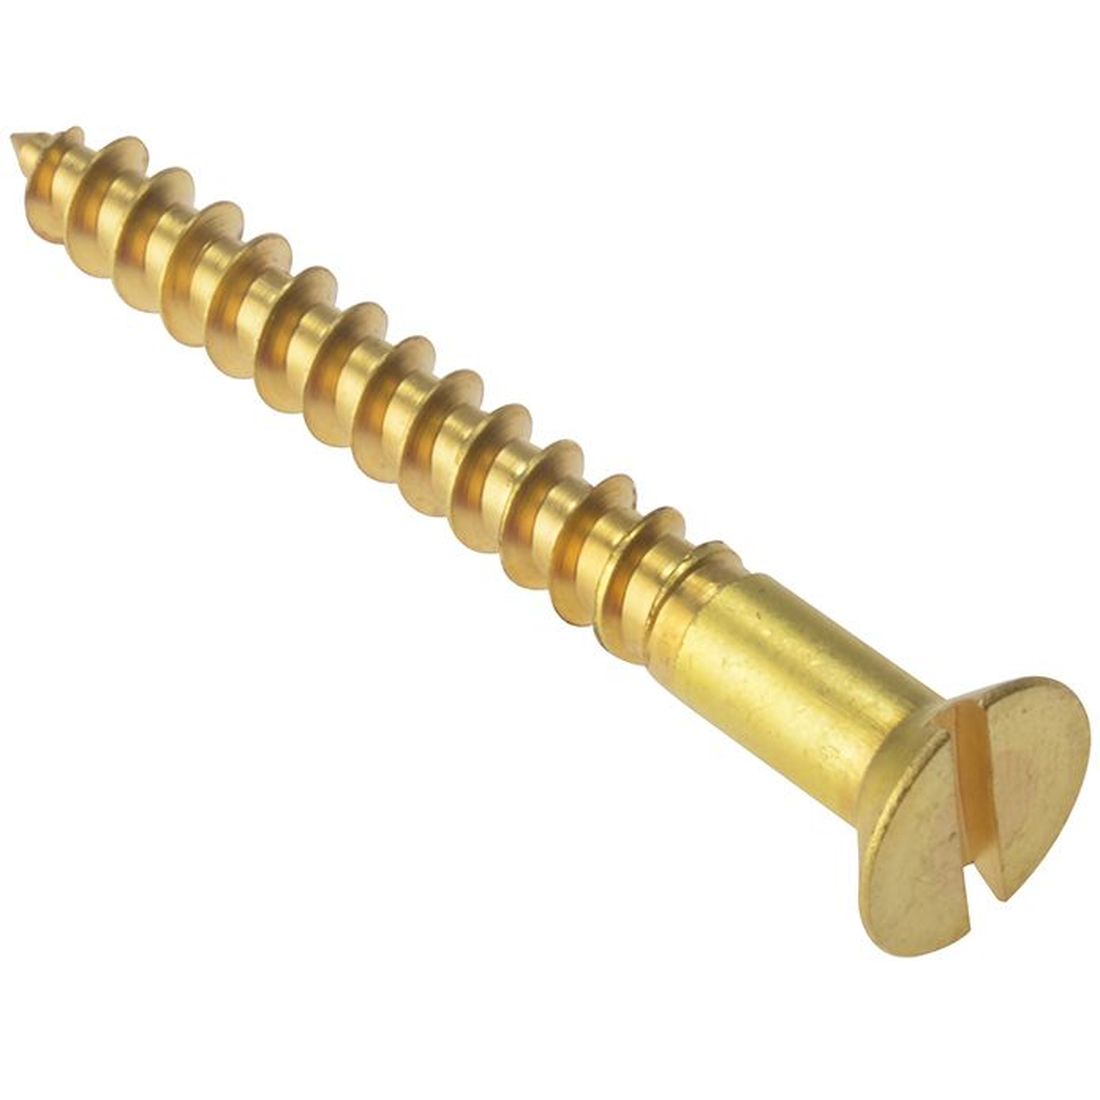 ForgeFix Wood Screw Slotted CSK Solid Brass 1.1/2in x 12 Box 200                         